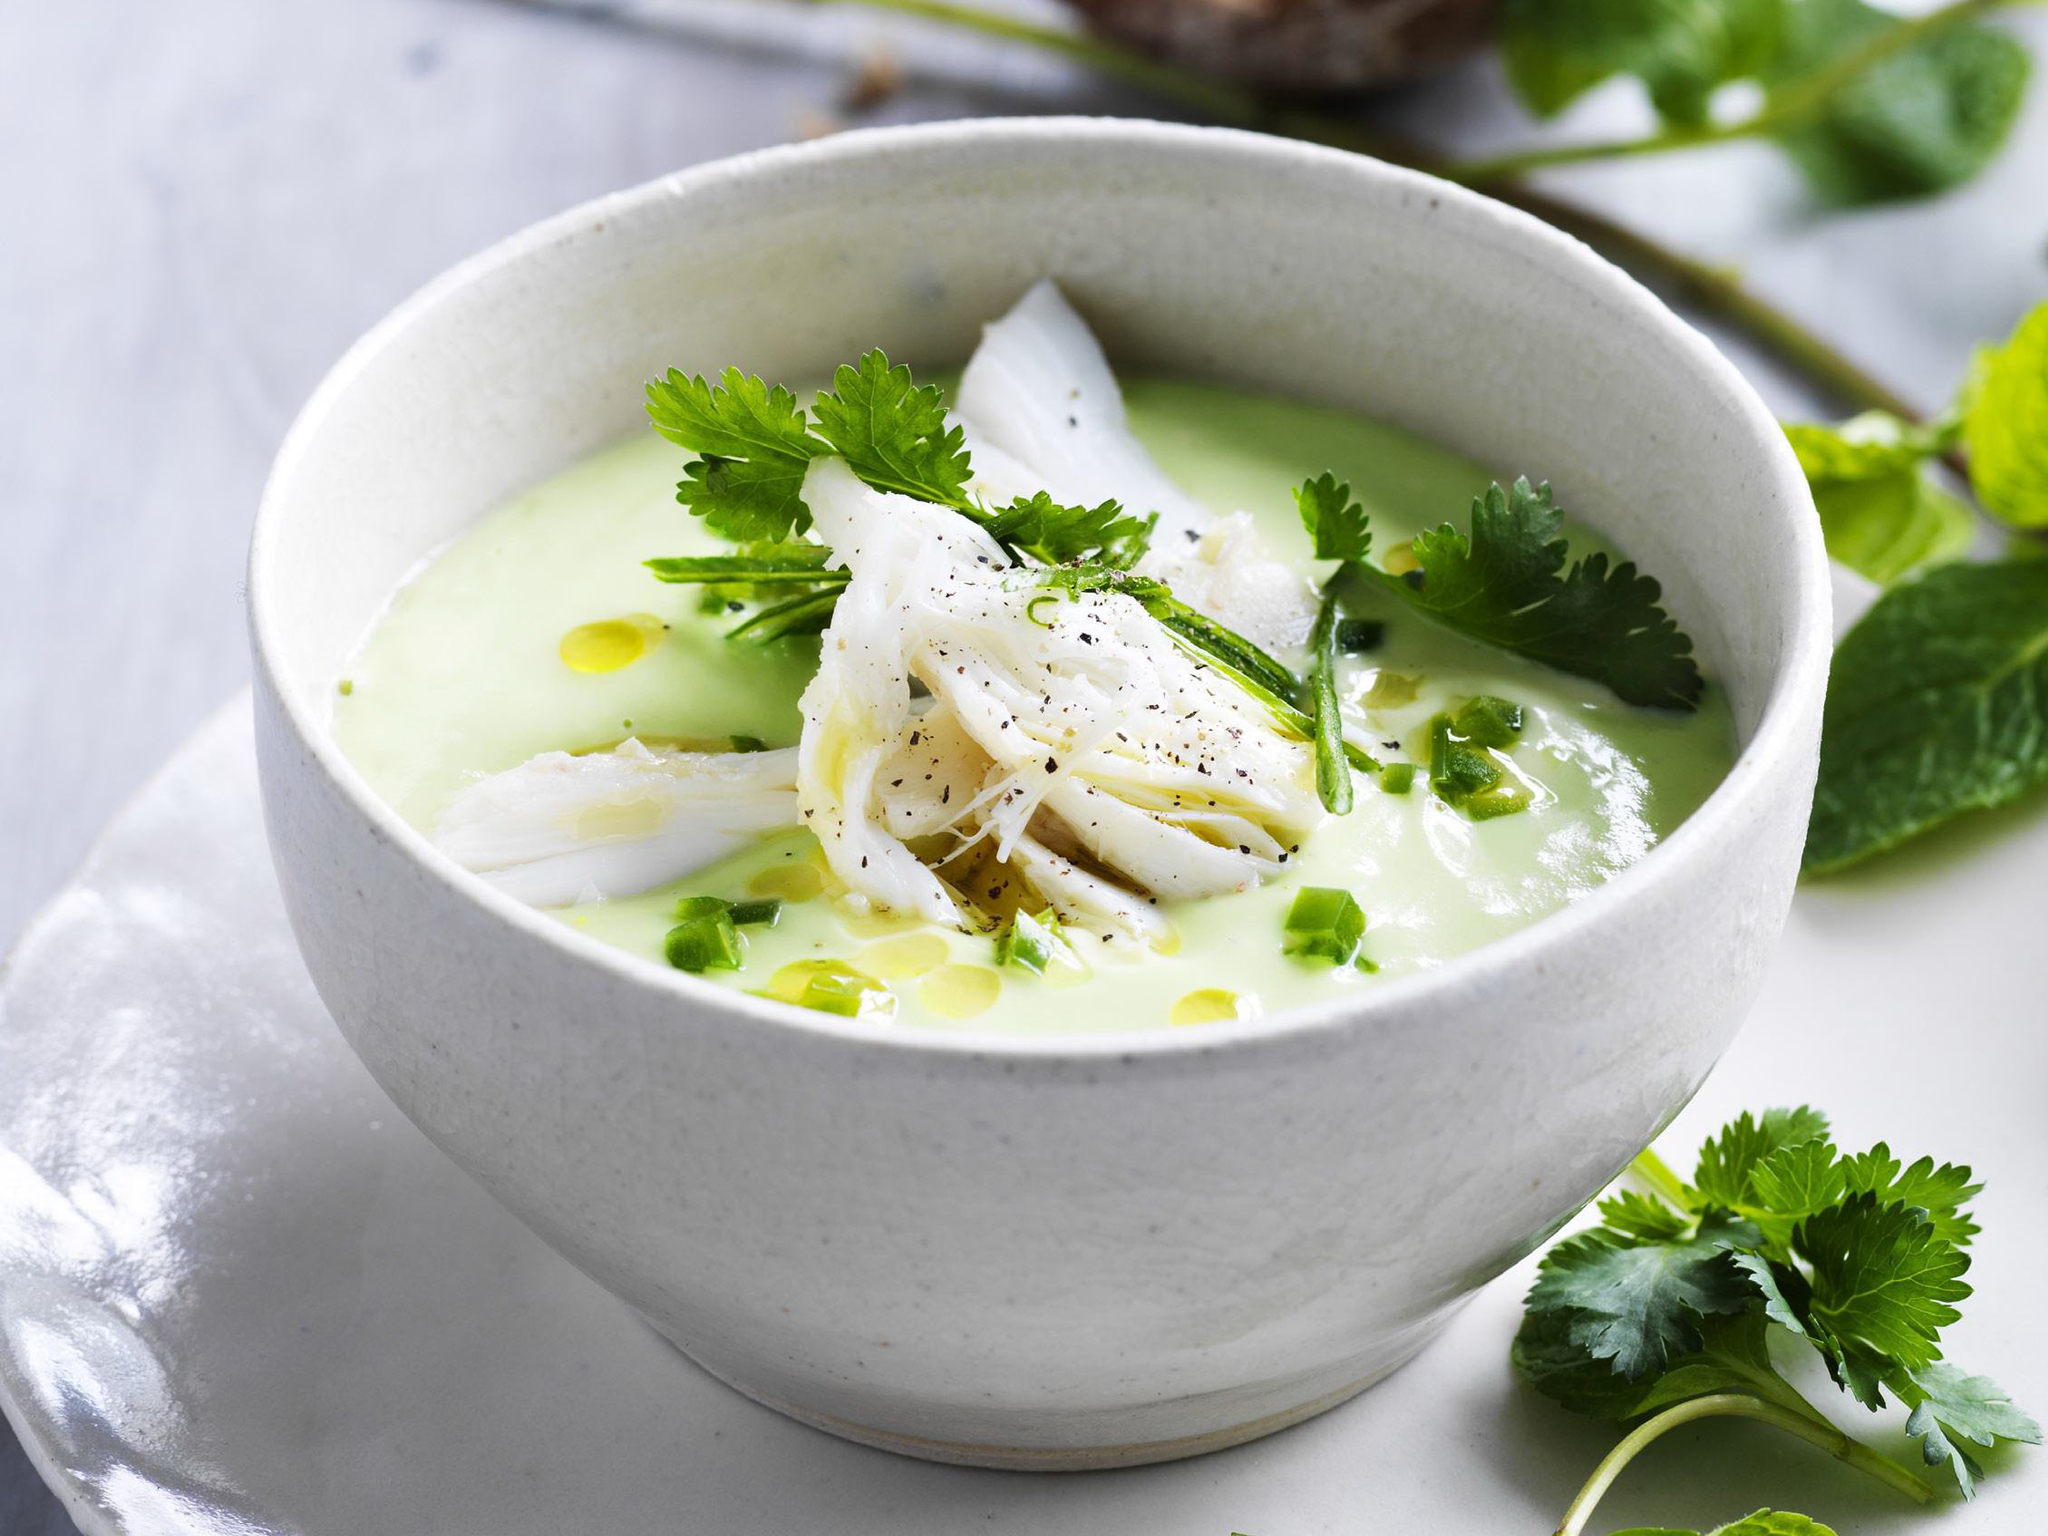 chilled avocado soup with crab